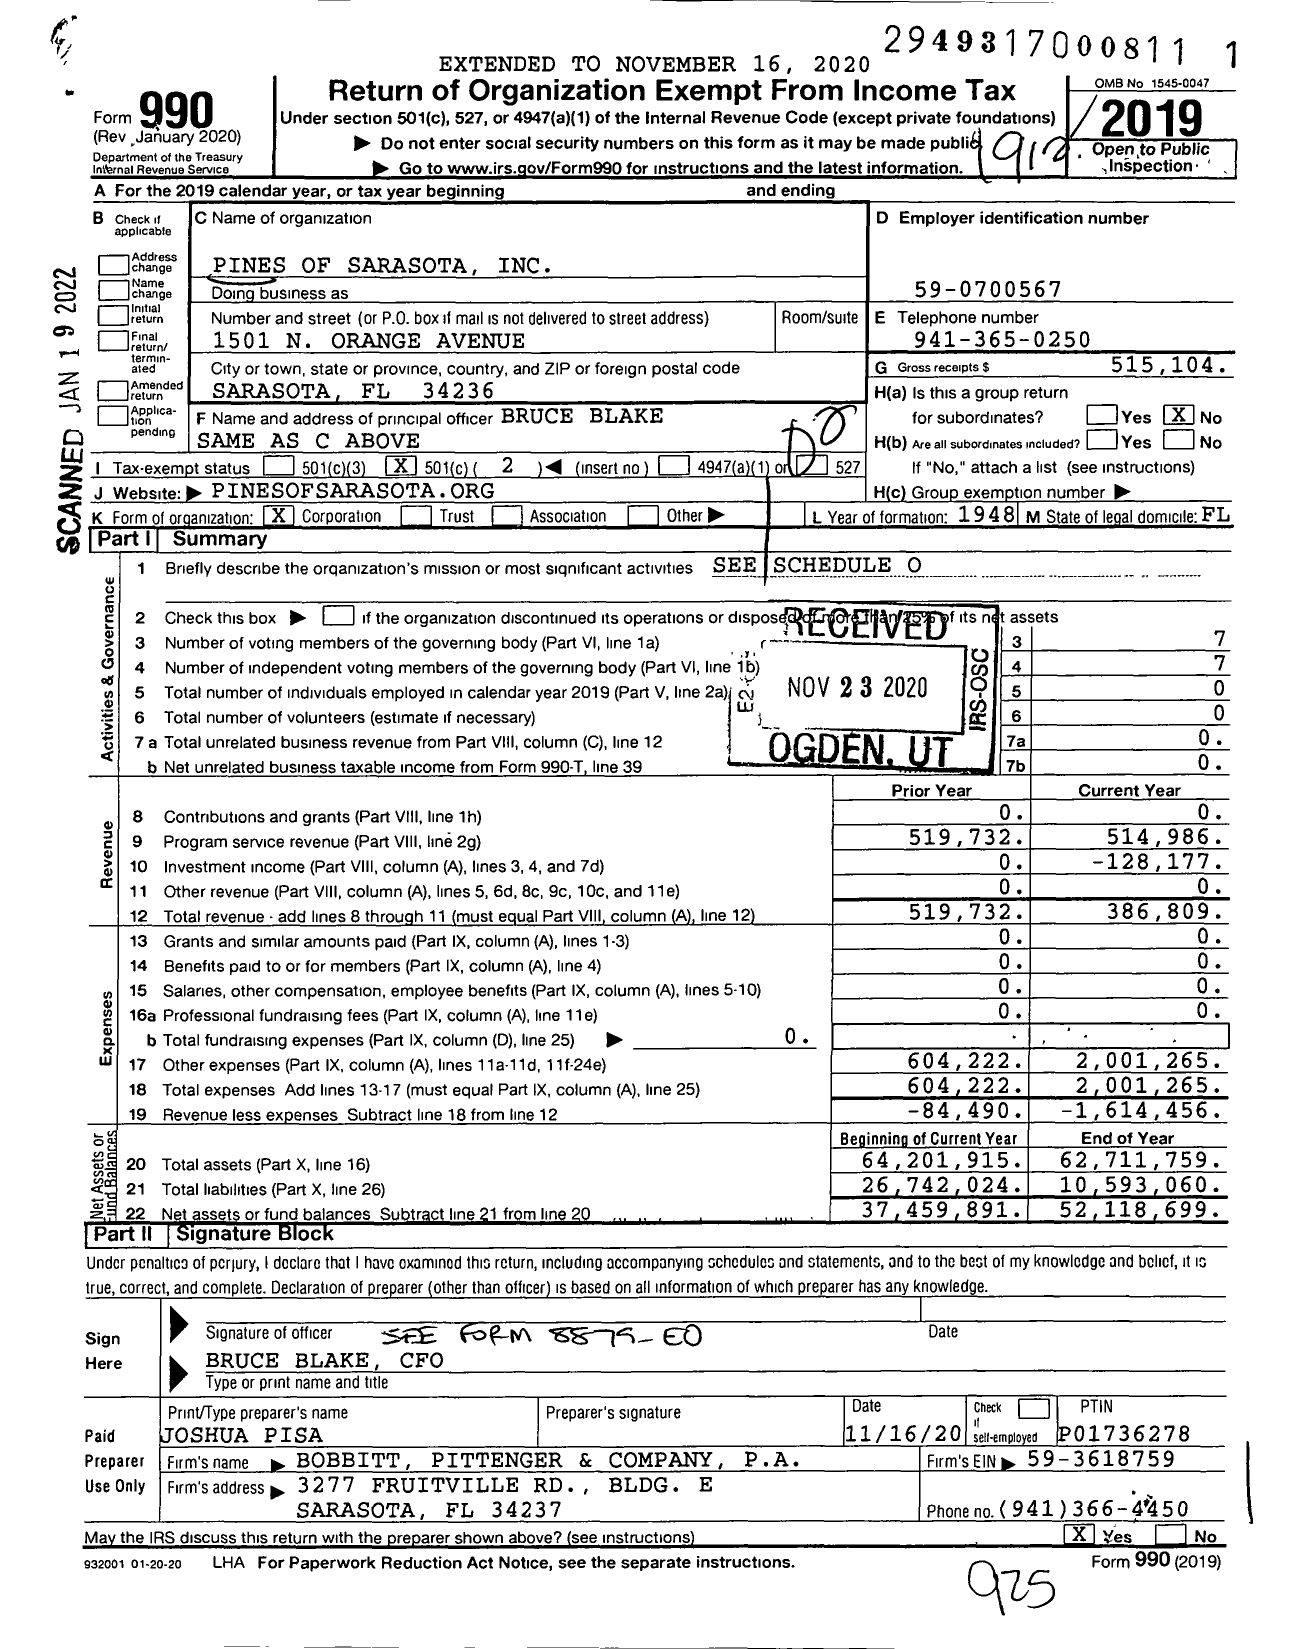 Image of first page of 2019 Form 990O for Pines of Sarasota